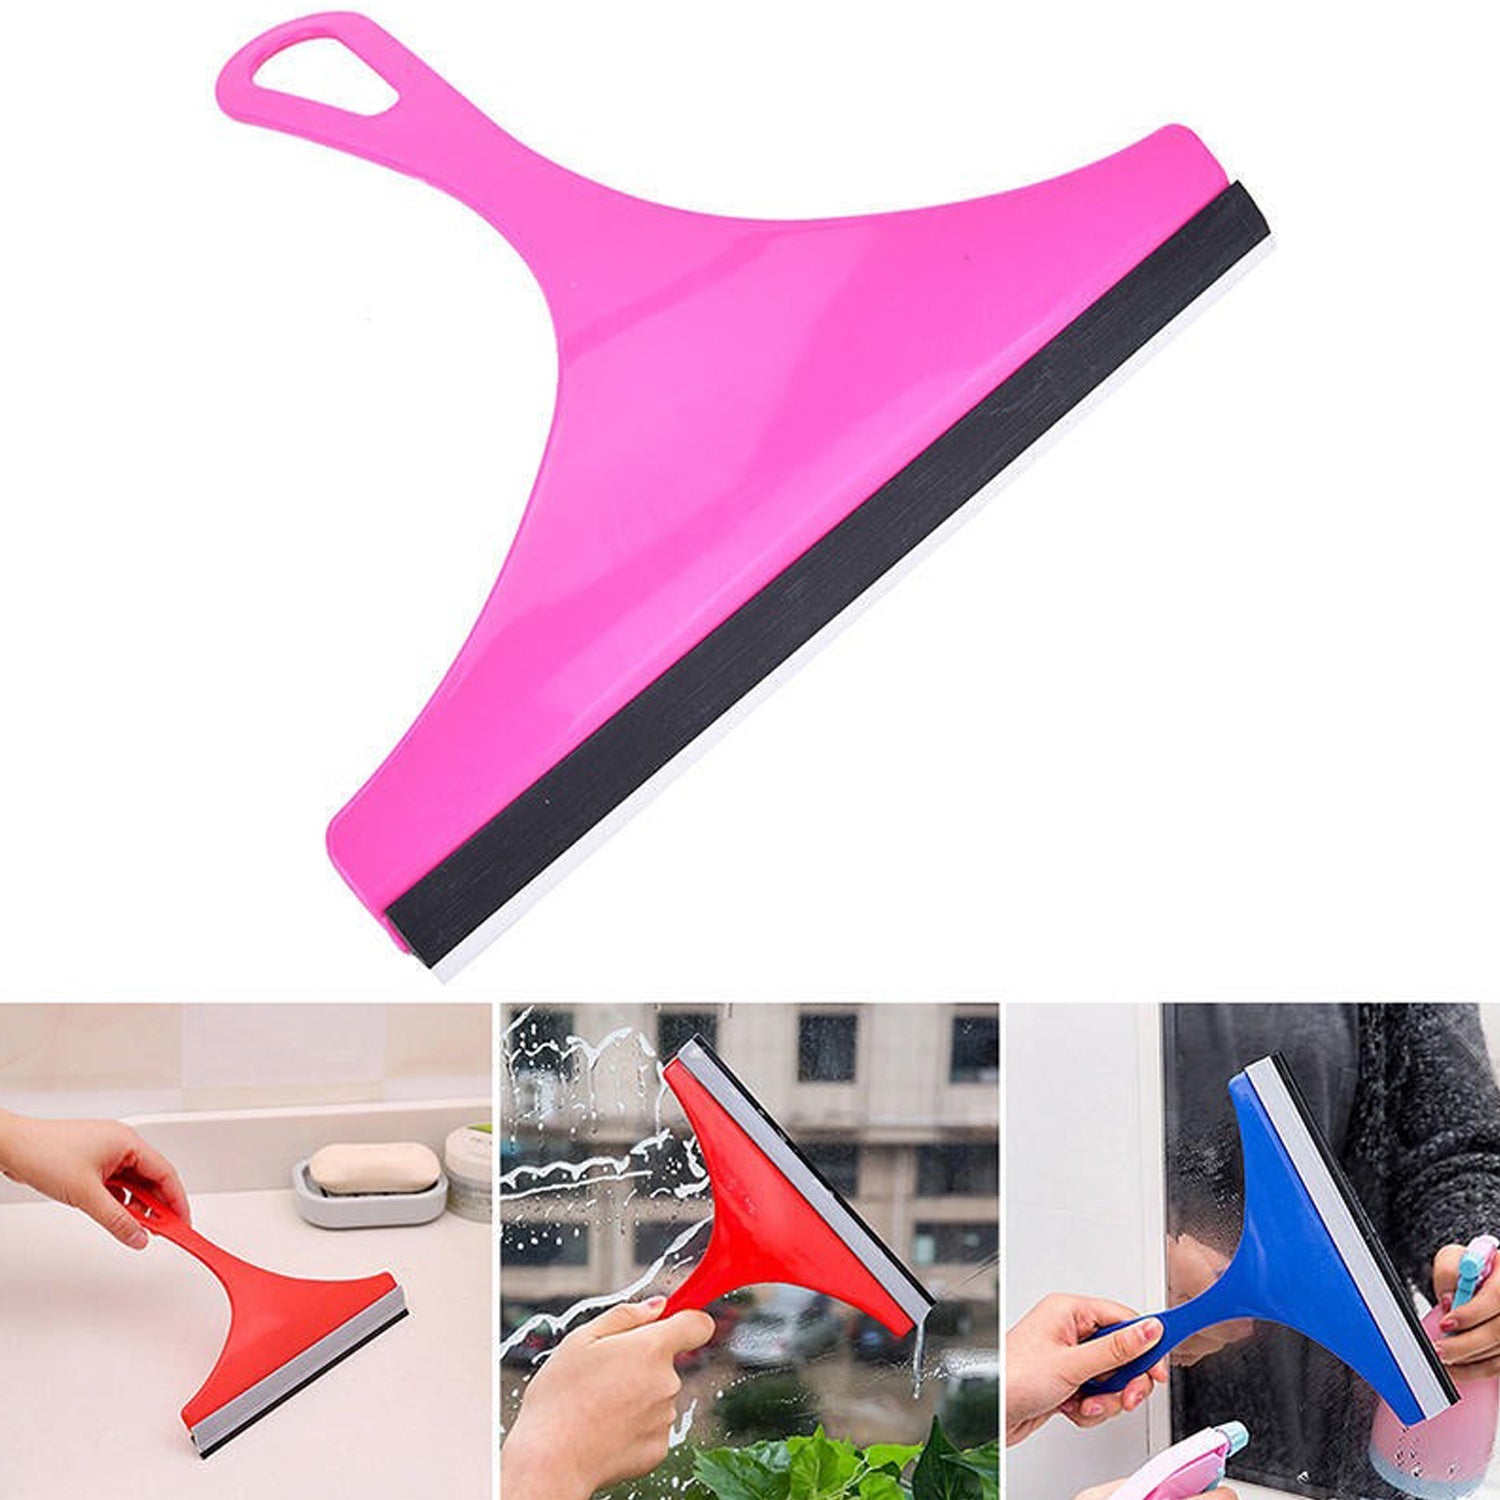 6133 Car Mirror Wiper used for all kinds of cars and vehicles for cleaning and wiping off mirror etc. DeoDap